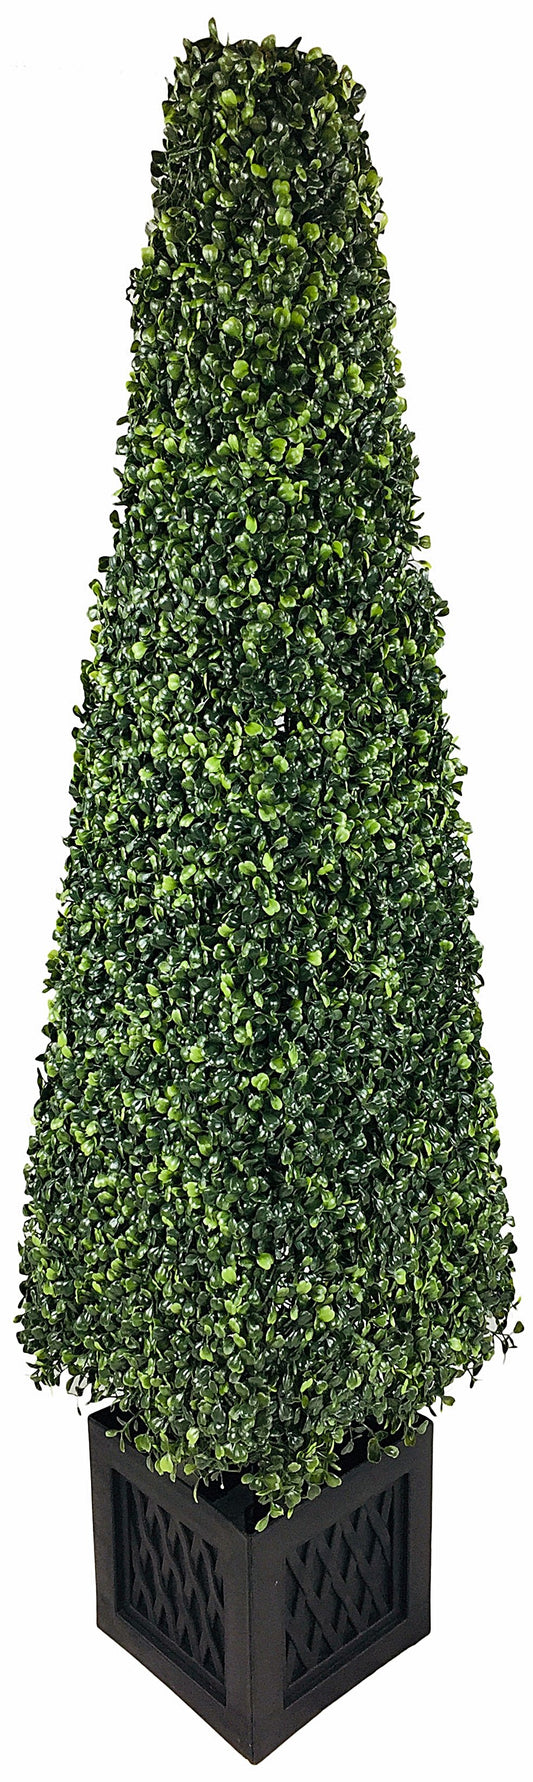 artificial-120cm-boxwood-tower